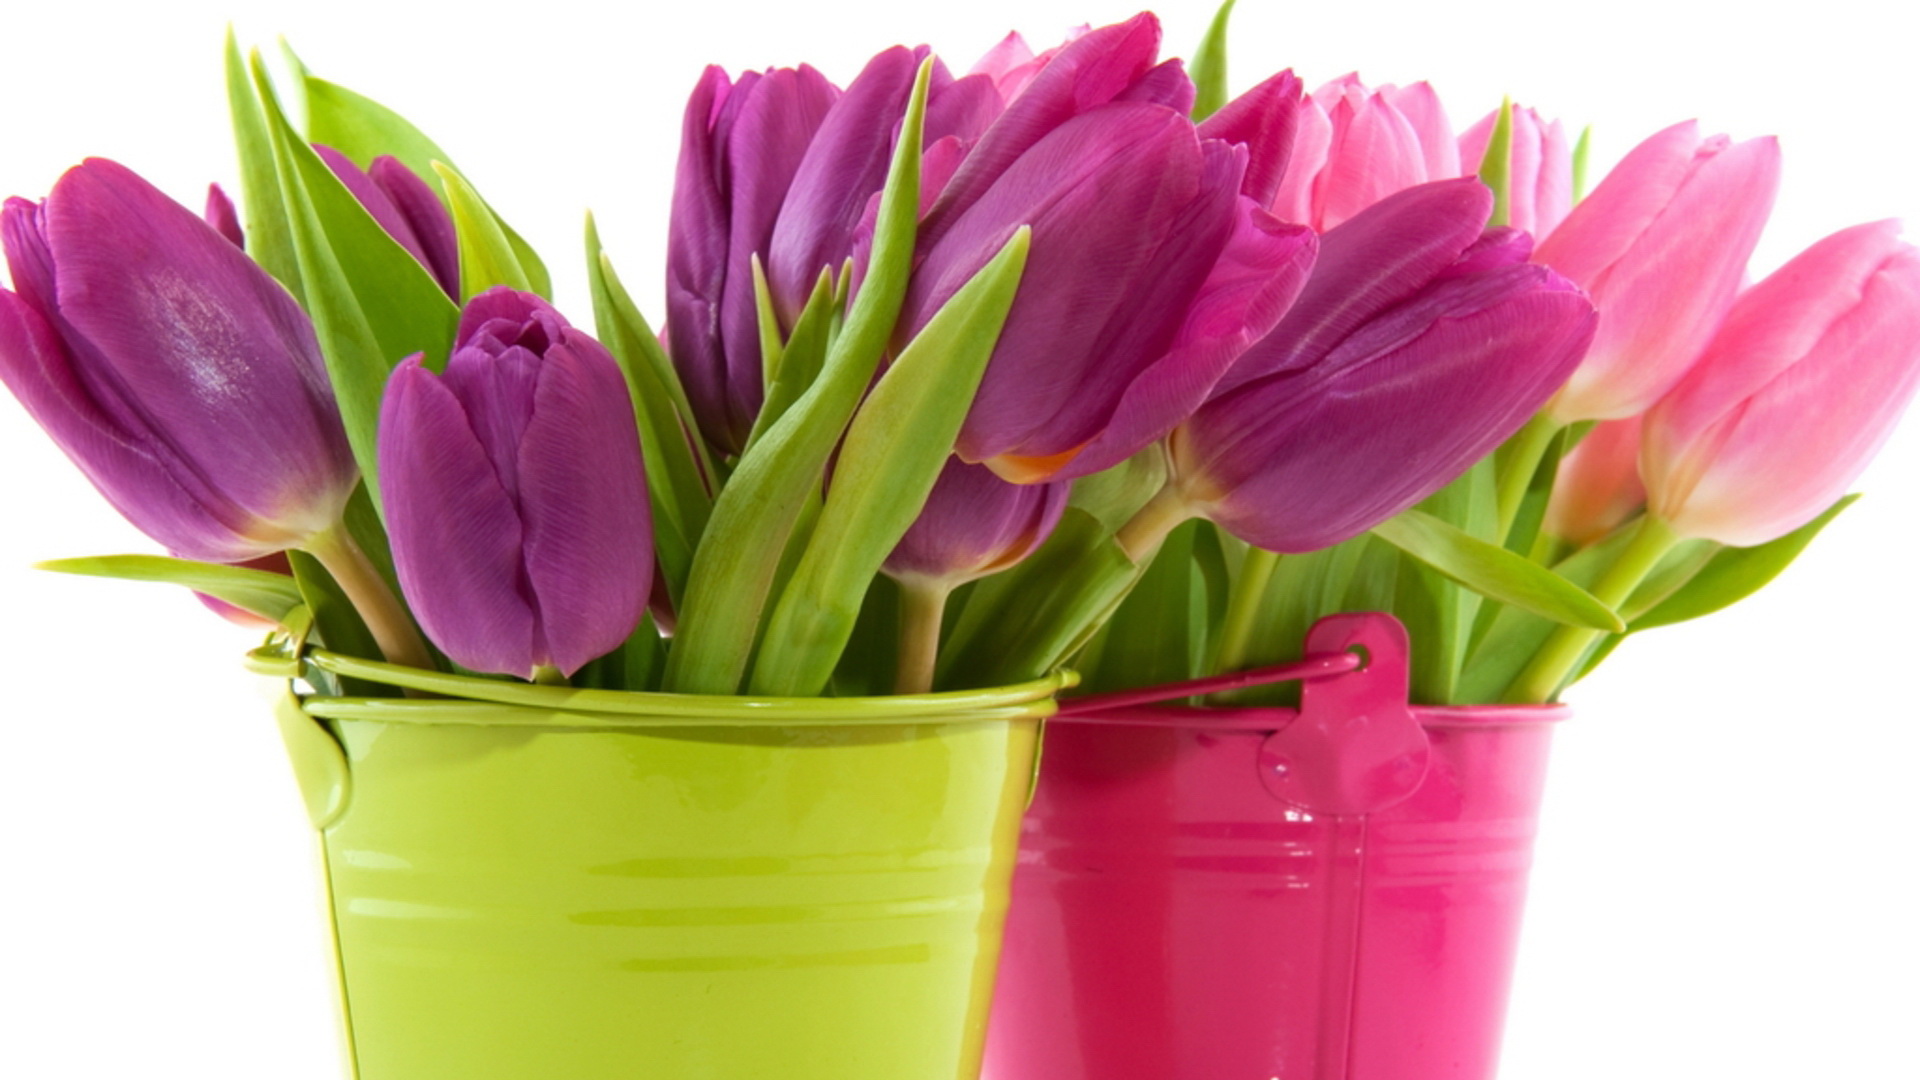 Decoration Tulips Flowers Wallpaper Android Image Desktop Picture